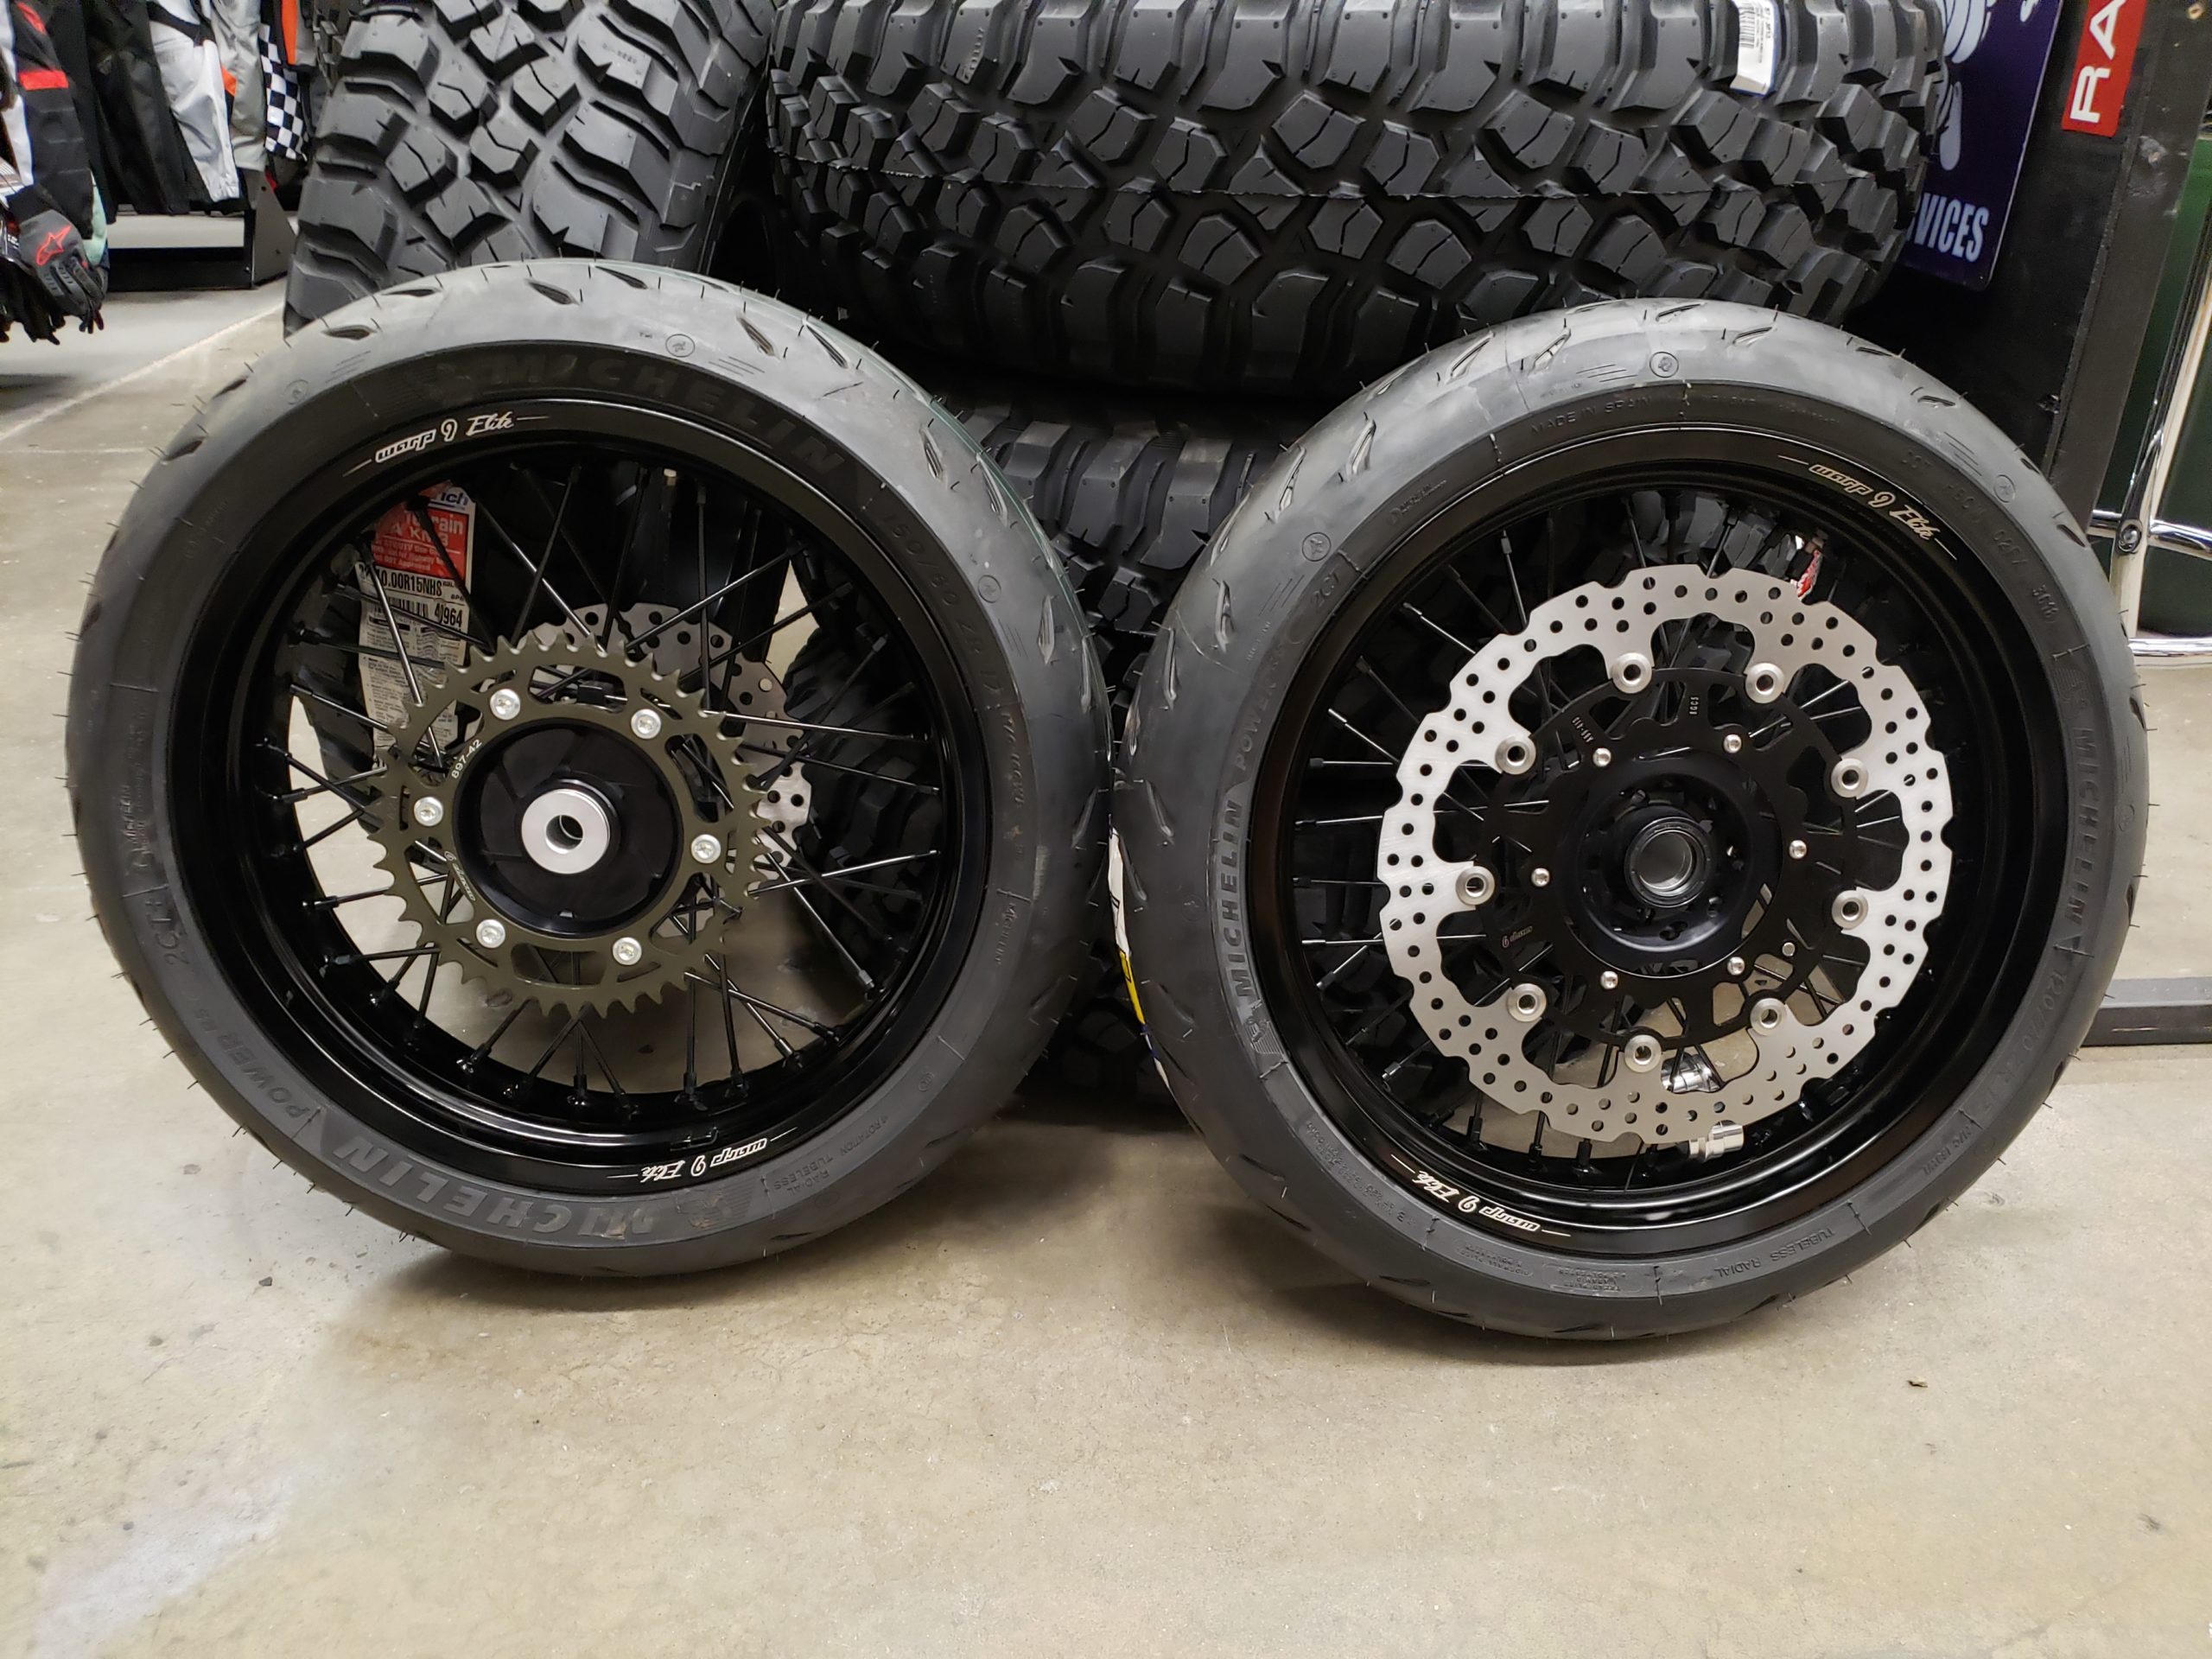 Closeout KTM / HUSKY Supermoto Wheels with tires Black